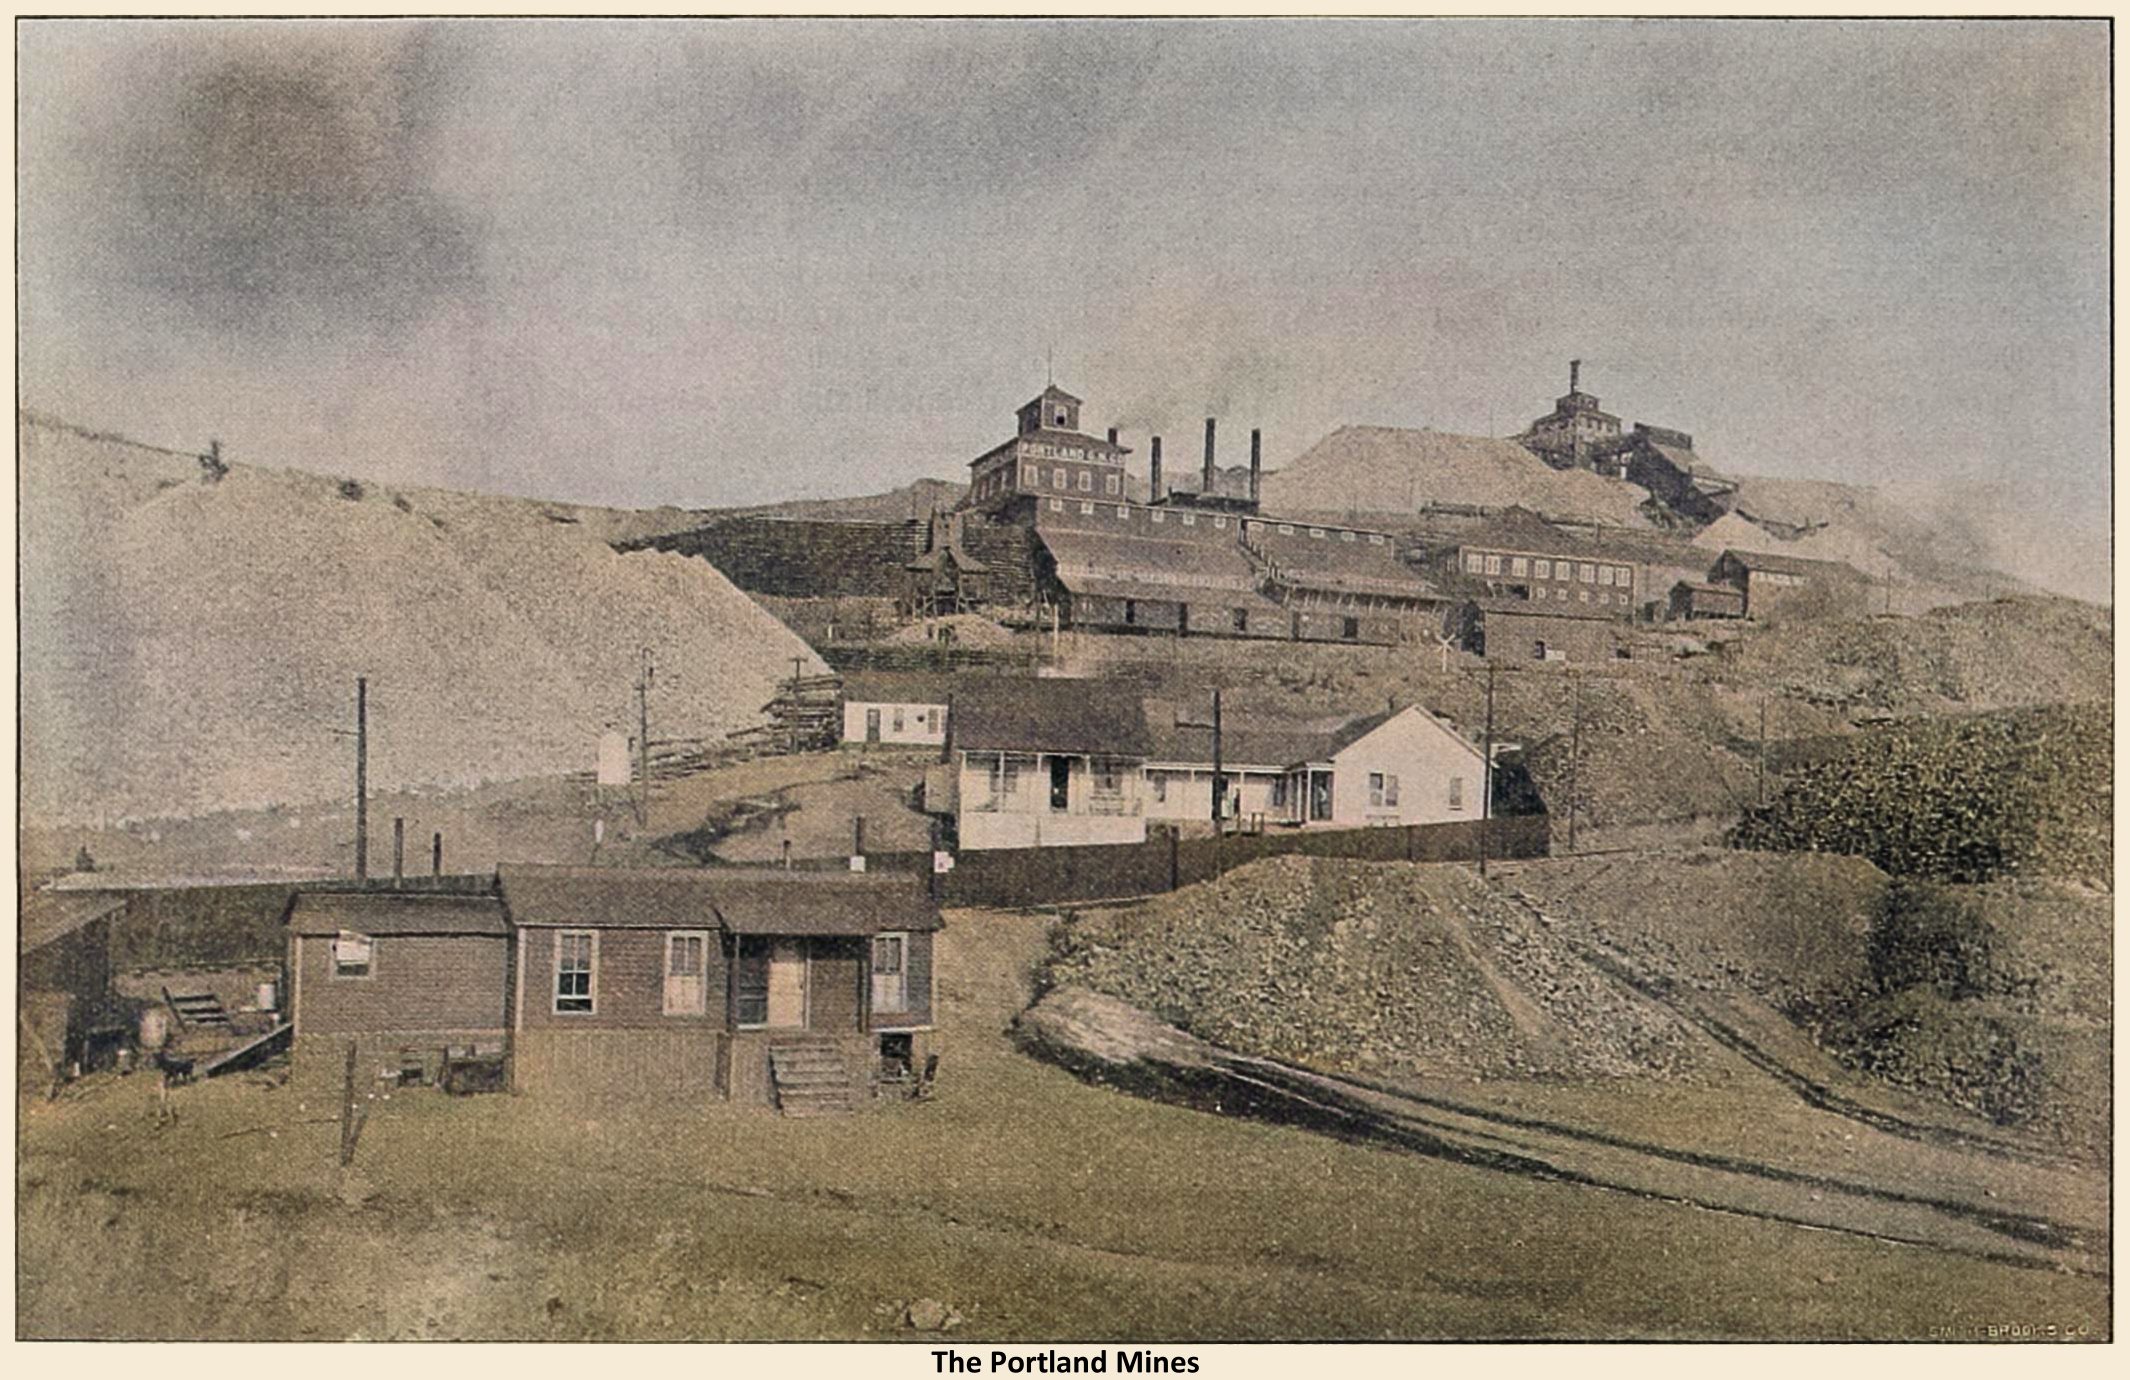 This scene is from 1901 to 1902, as the original High Line is seen in this view, running in front of the darker fence seen about 1/3 up from bottom between the house in front and the houses about center of the view. And in the background, up below the Portland No. 2 Shaft, there is railroad cars seen that belongs to the Short Line Portland Spur, hence, the date is in this timeframe.
  Beside the Portland No. 2 Shaft up against the sky, the huge Portland No. 1 is seen a little bit further down the hill, with railroad cars in front of the many Ore-houses at the mine, and the many structures belonging to the mine.
  I did procure the colored version of this image. Source was grey-toned, or in common speech black & white. Used an online service and tweaked and worked with image to get what looks best to my eyes for the moment.